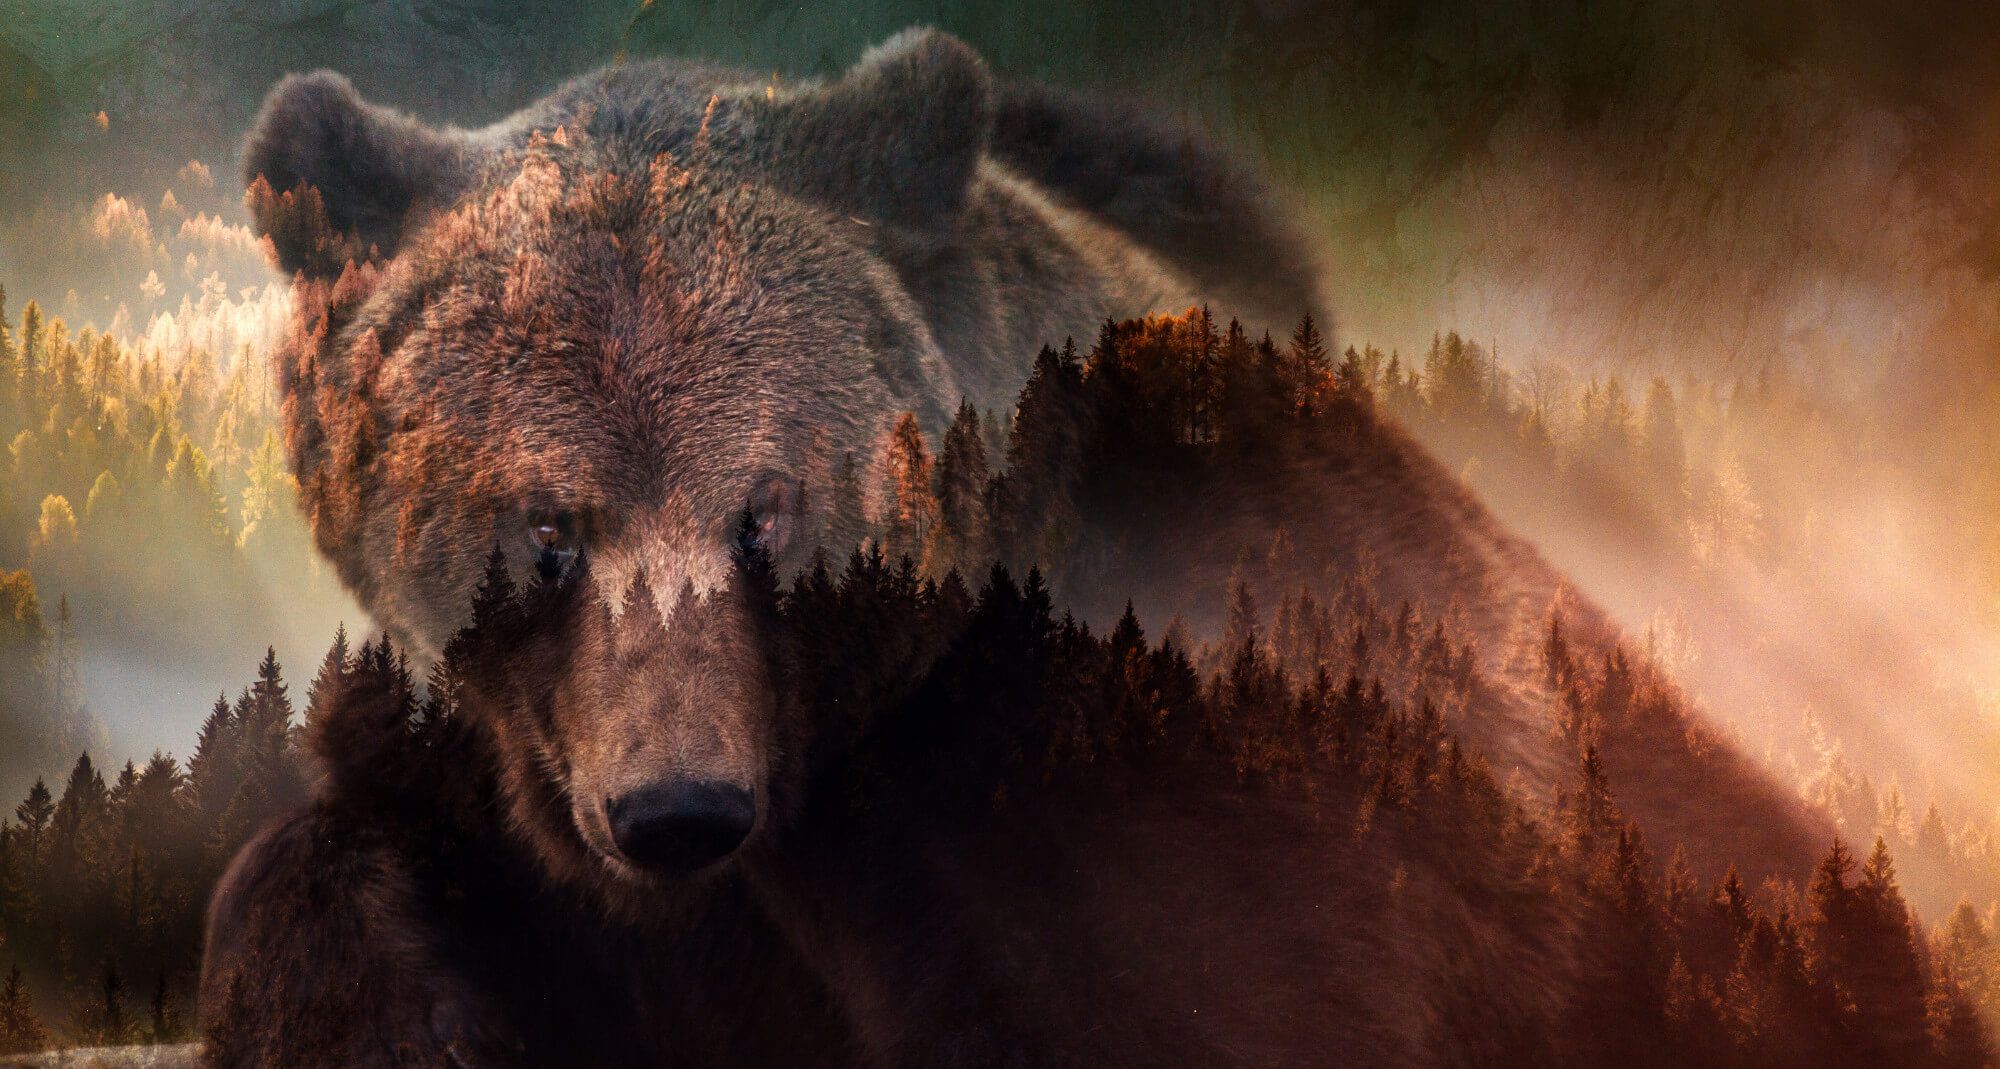 Edited image of forest lined hills with a large Grizzly Bear overlaid.